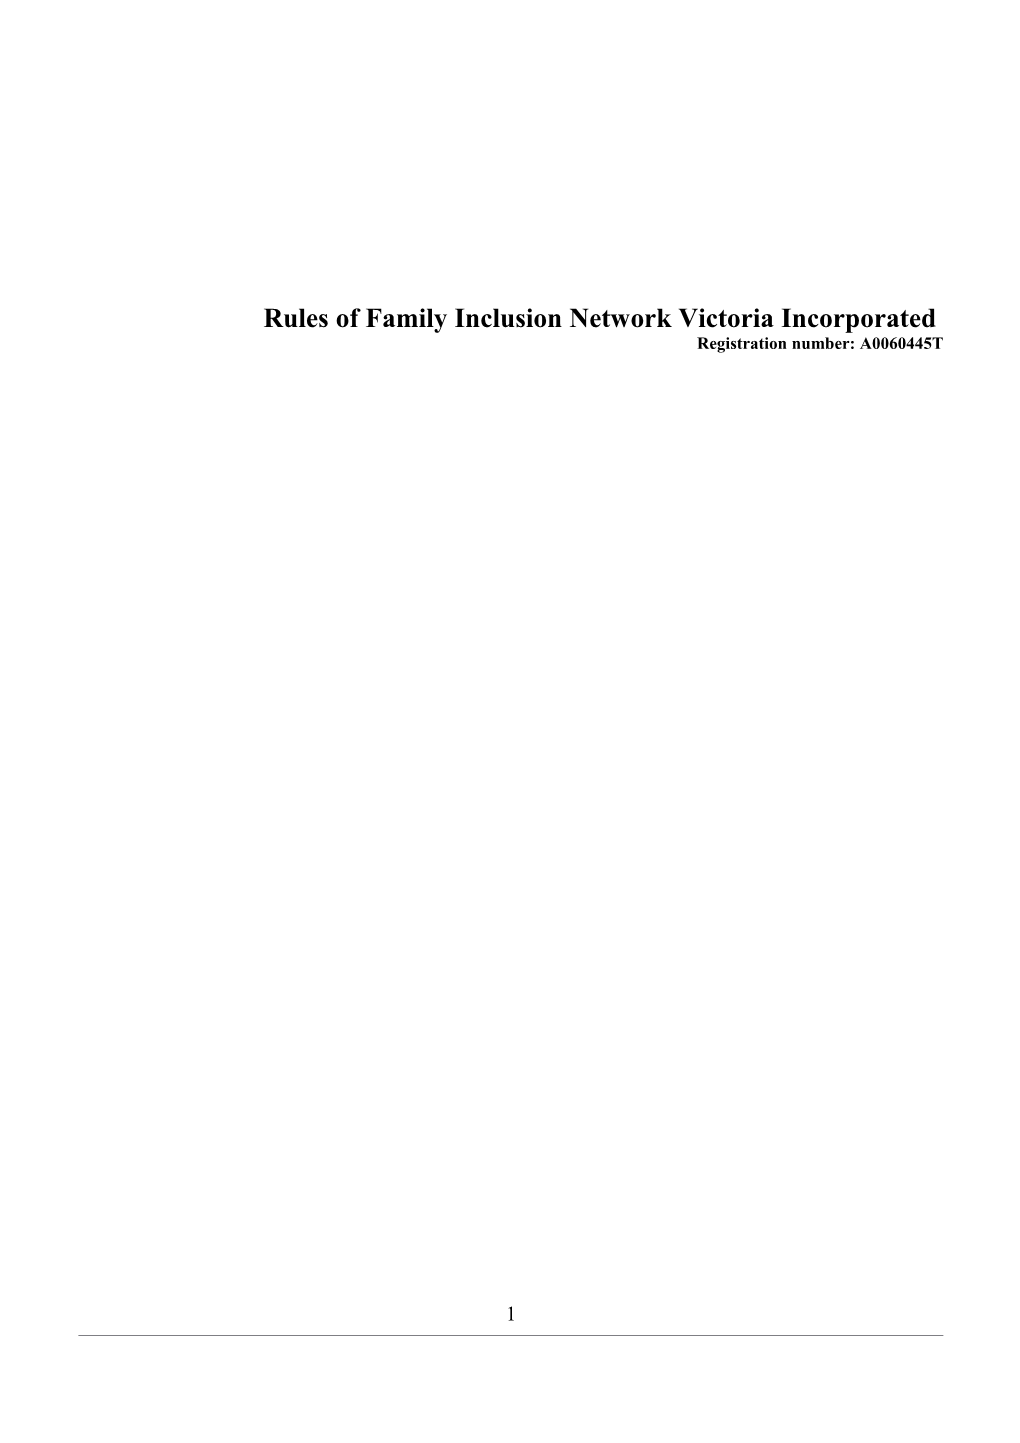 Rules of Family Inclusion Network Victoria Incorporated